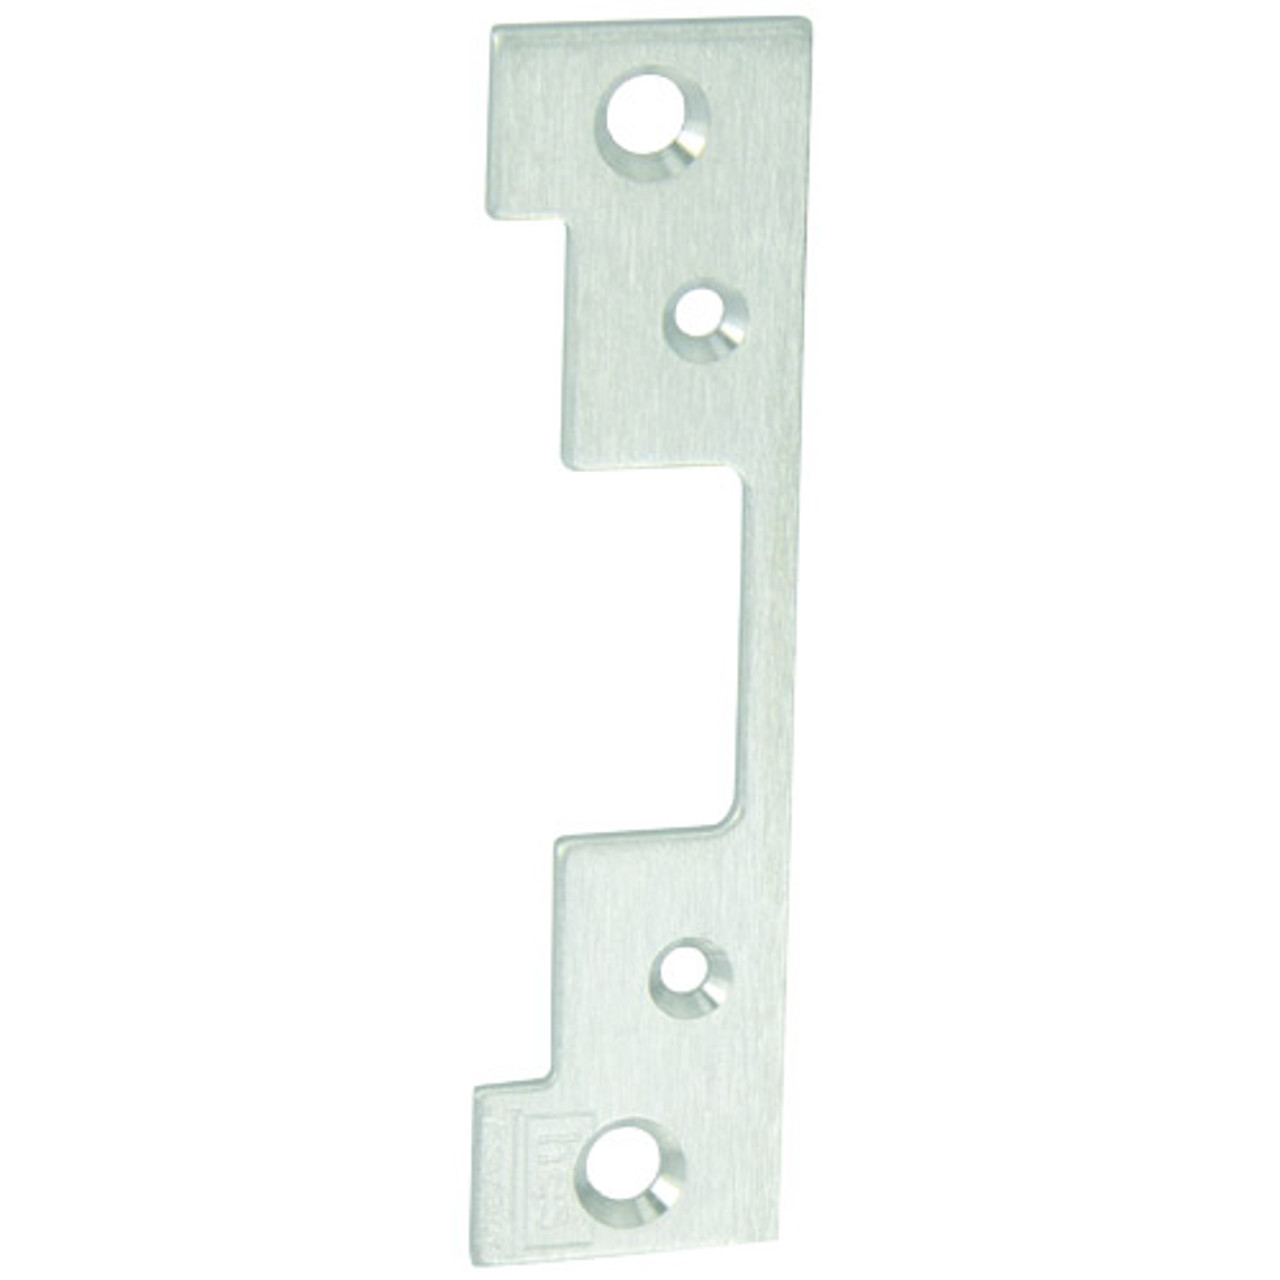 503-629 Hes 6-7/8 x 1-1/4" Faceplate in Bright Stainless Steel Finish